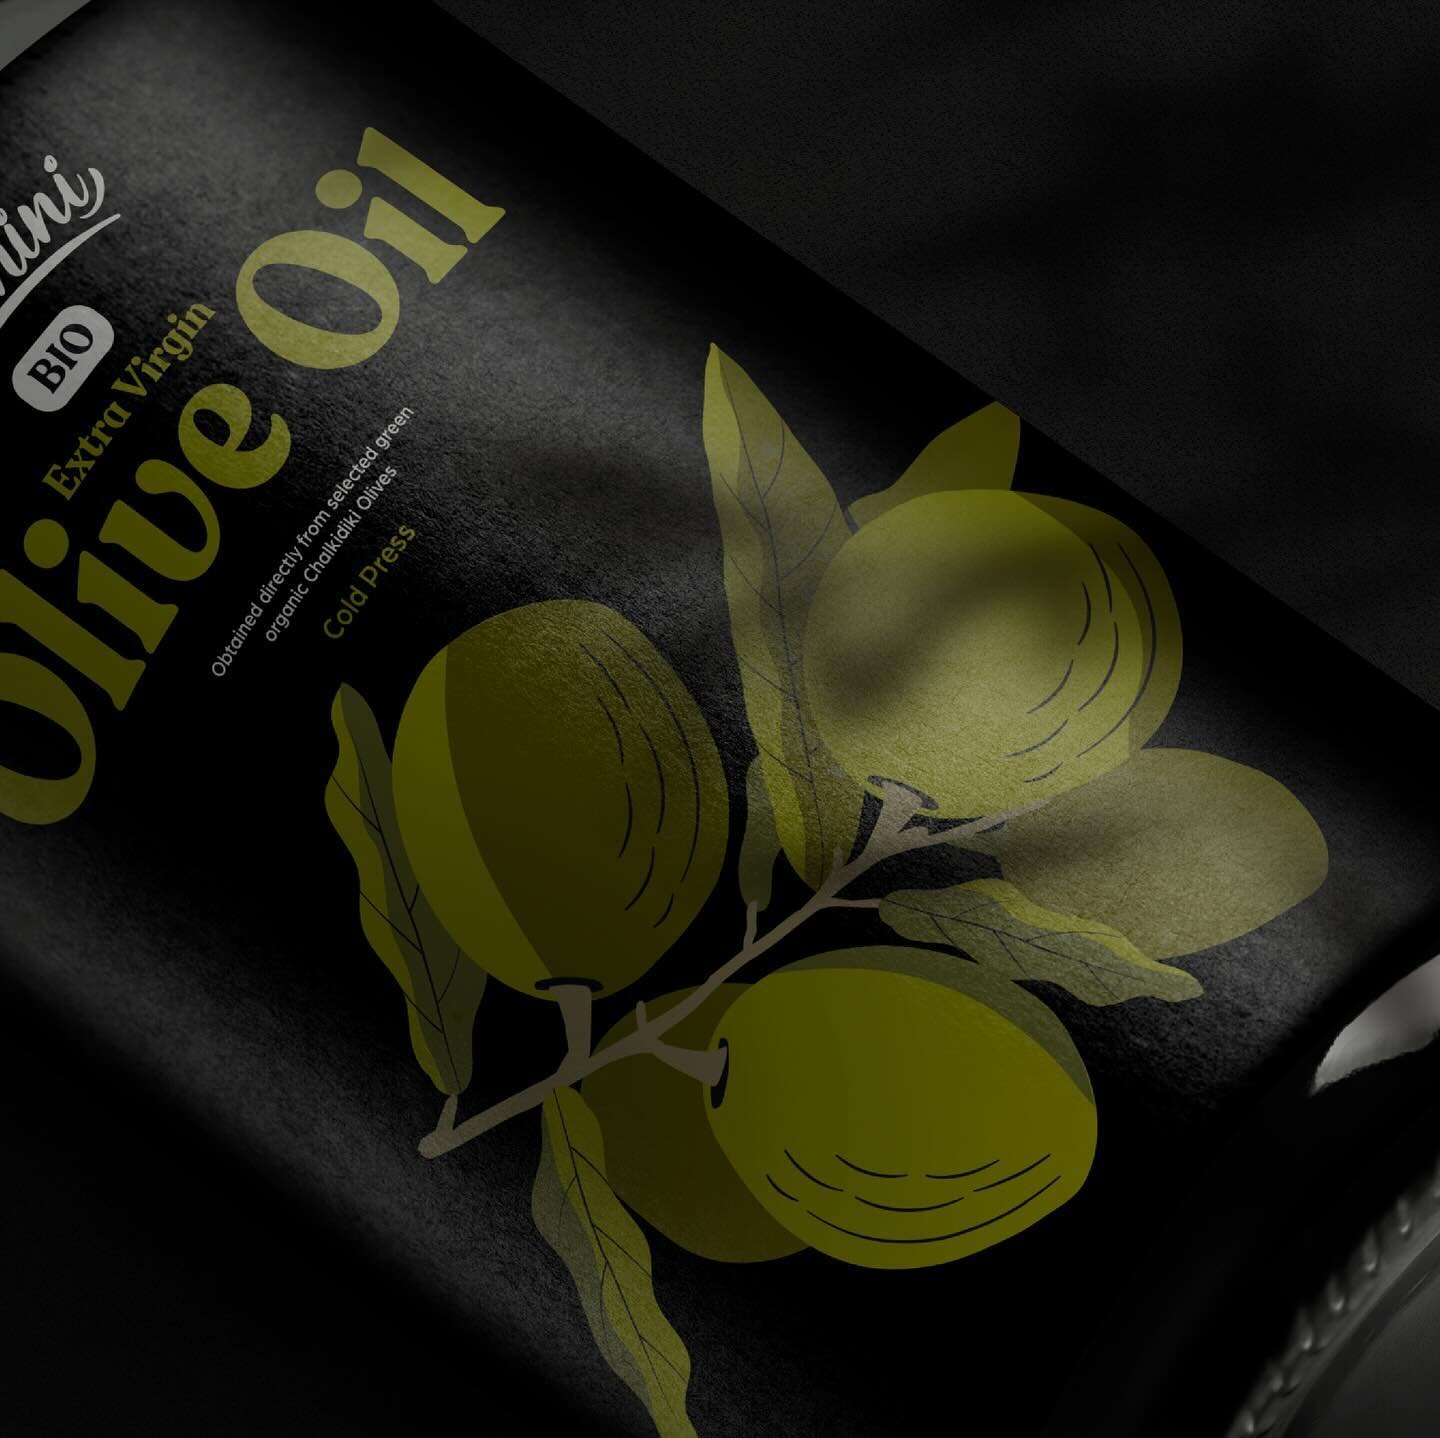 The chosen color palette for Orechini Olive oil consists of gentle greens and muted earthy tones, evoking the authenticity of olive groves used in the label proposal, while having a matte finish on the dark bottle.

.#graphicdesign #visualidentity #b